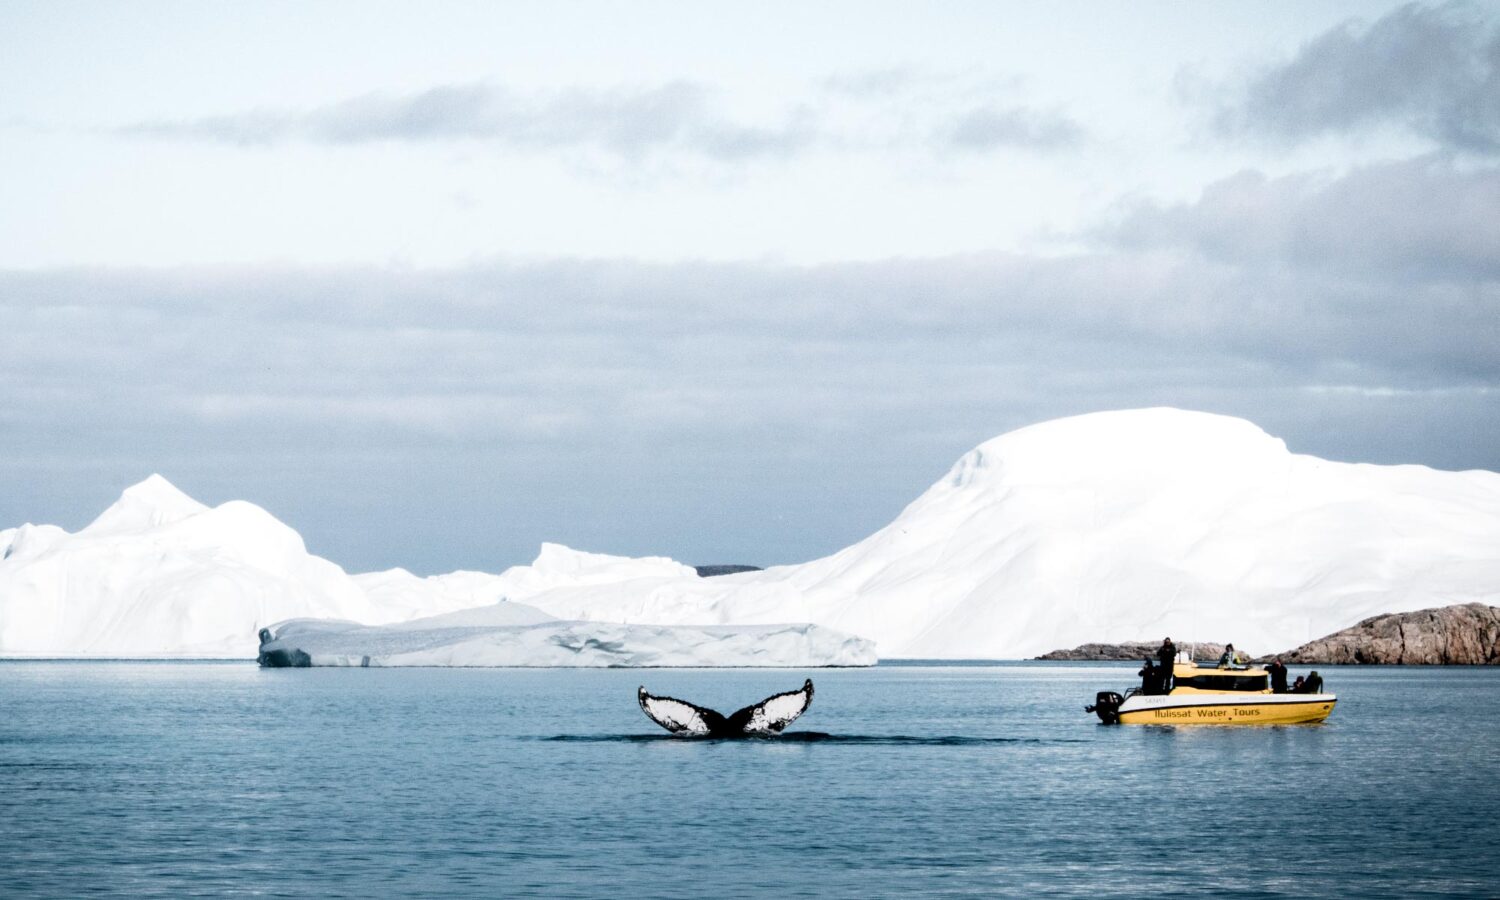 Arctic harmony – Whale amidst icebergs in Disko Bay, Ilulissat, making it the best time for Greenland whale watching